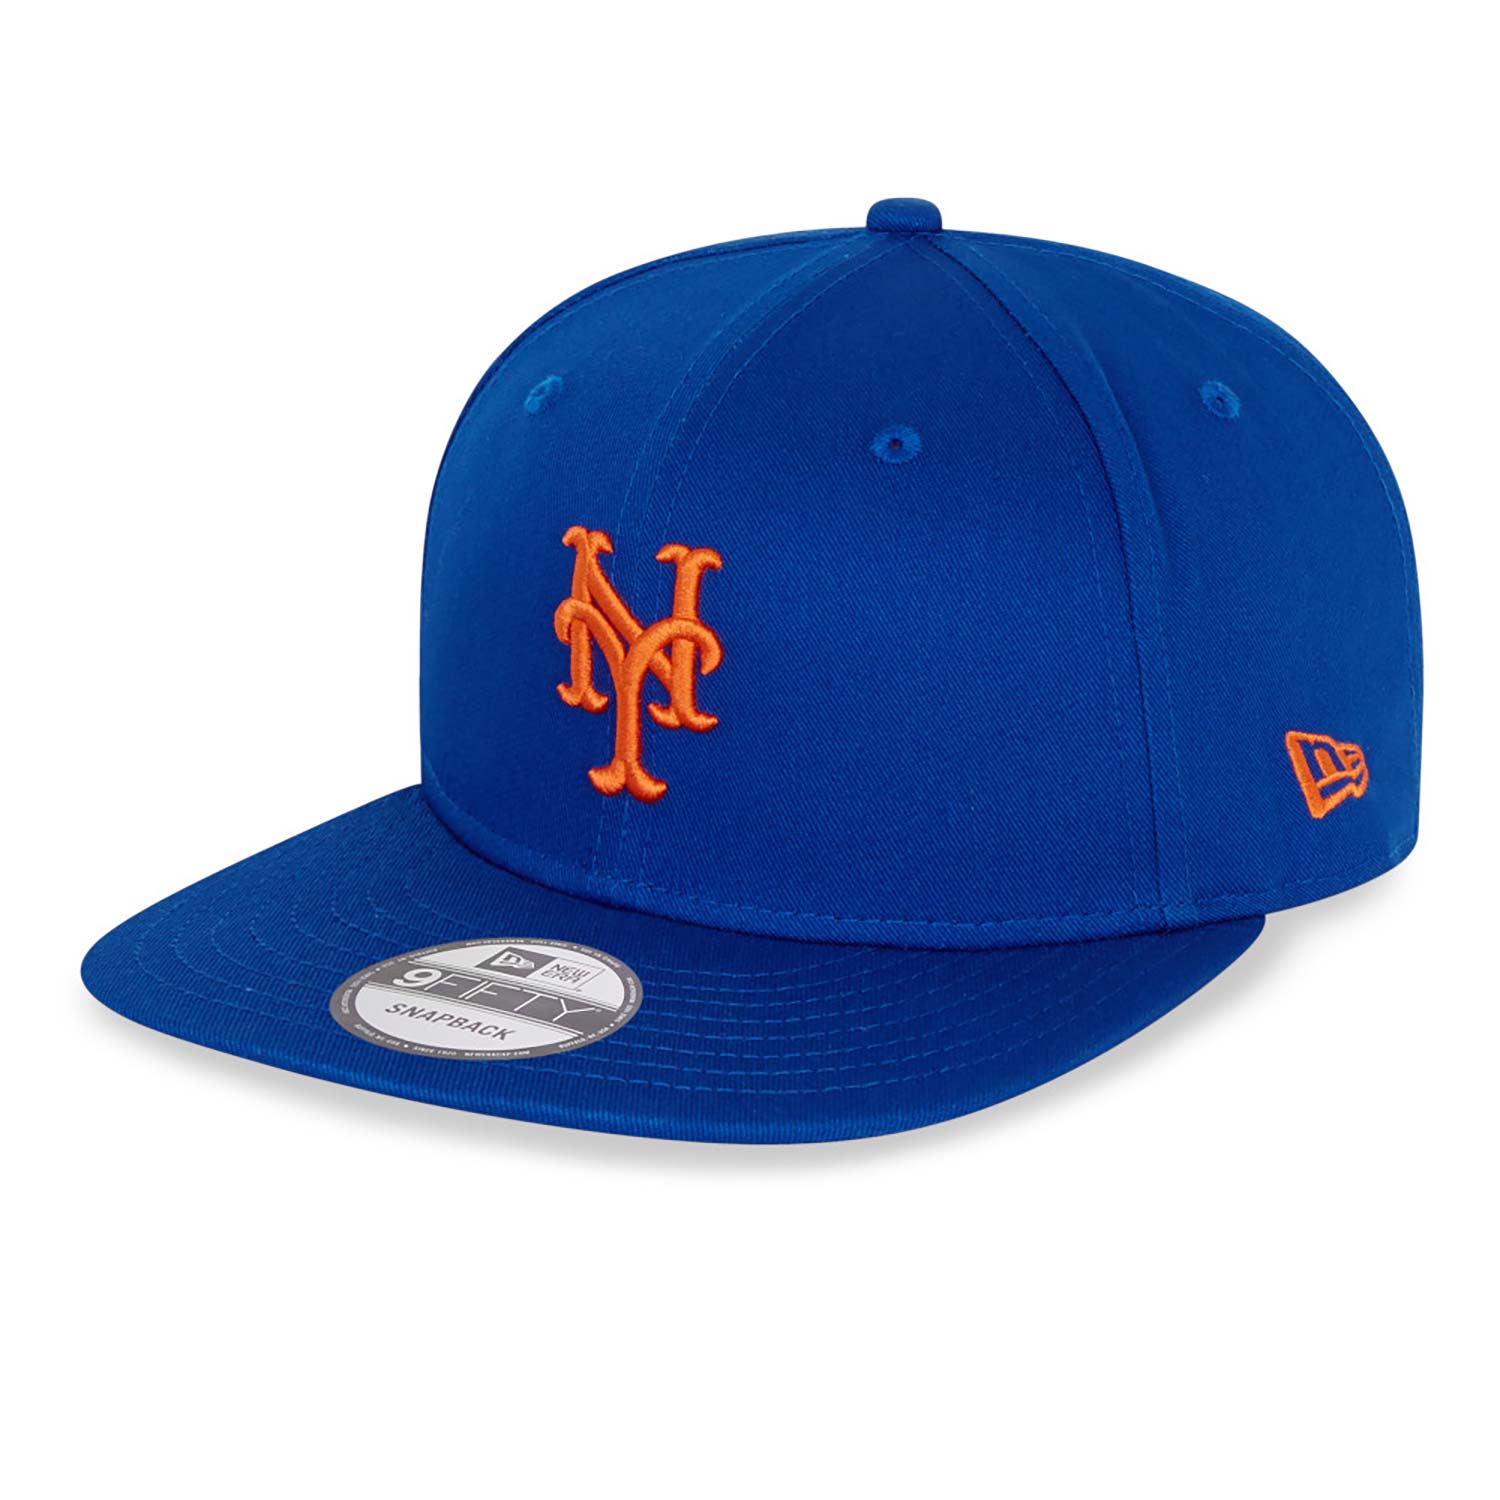 New York Mets MLB Essential Blue 9FIFTY Cap